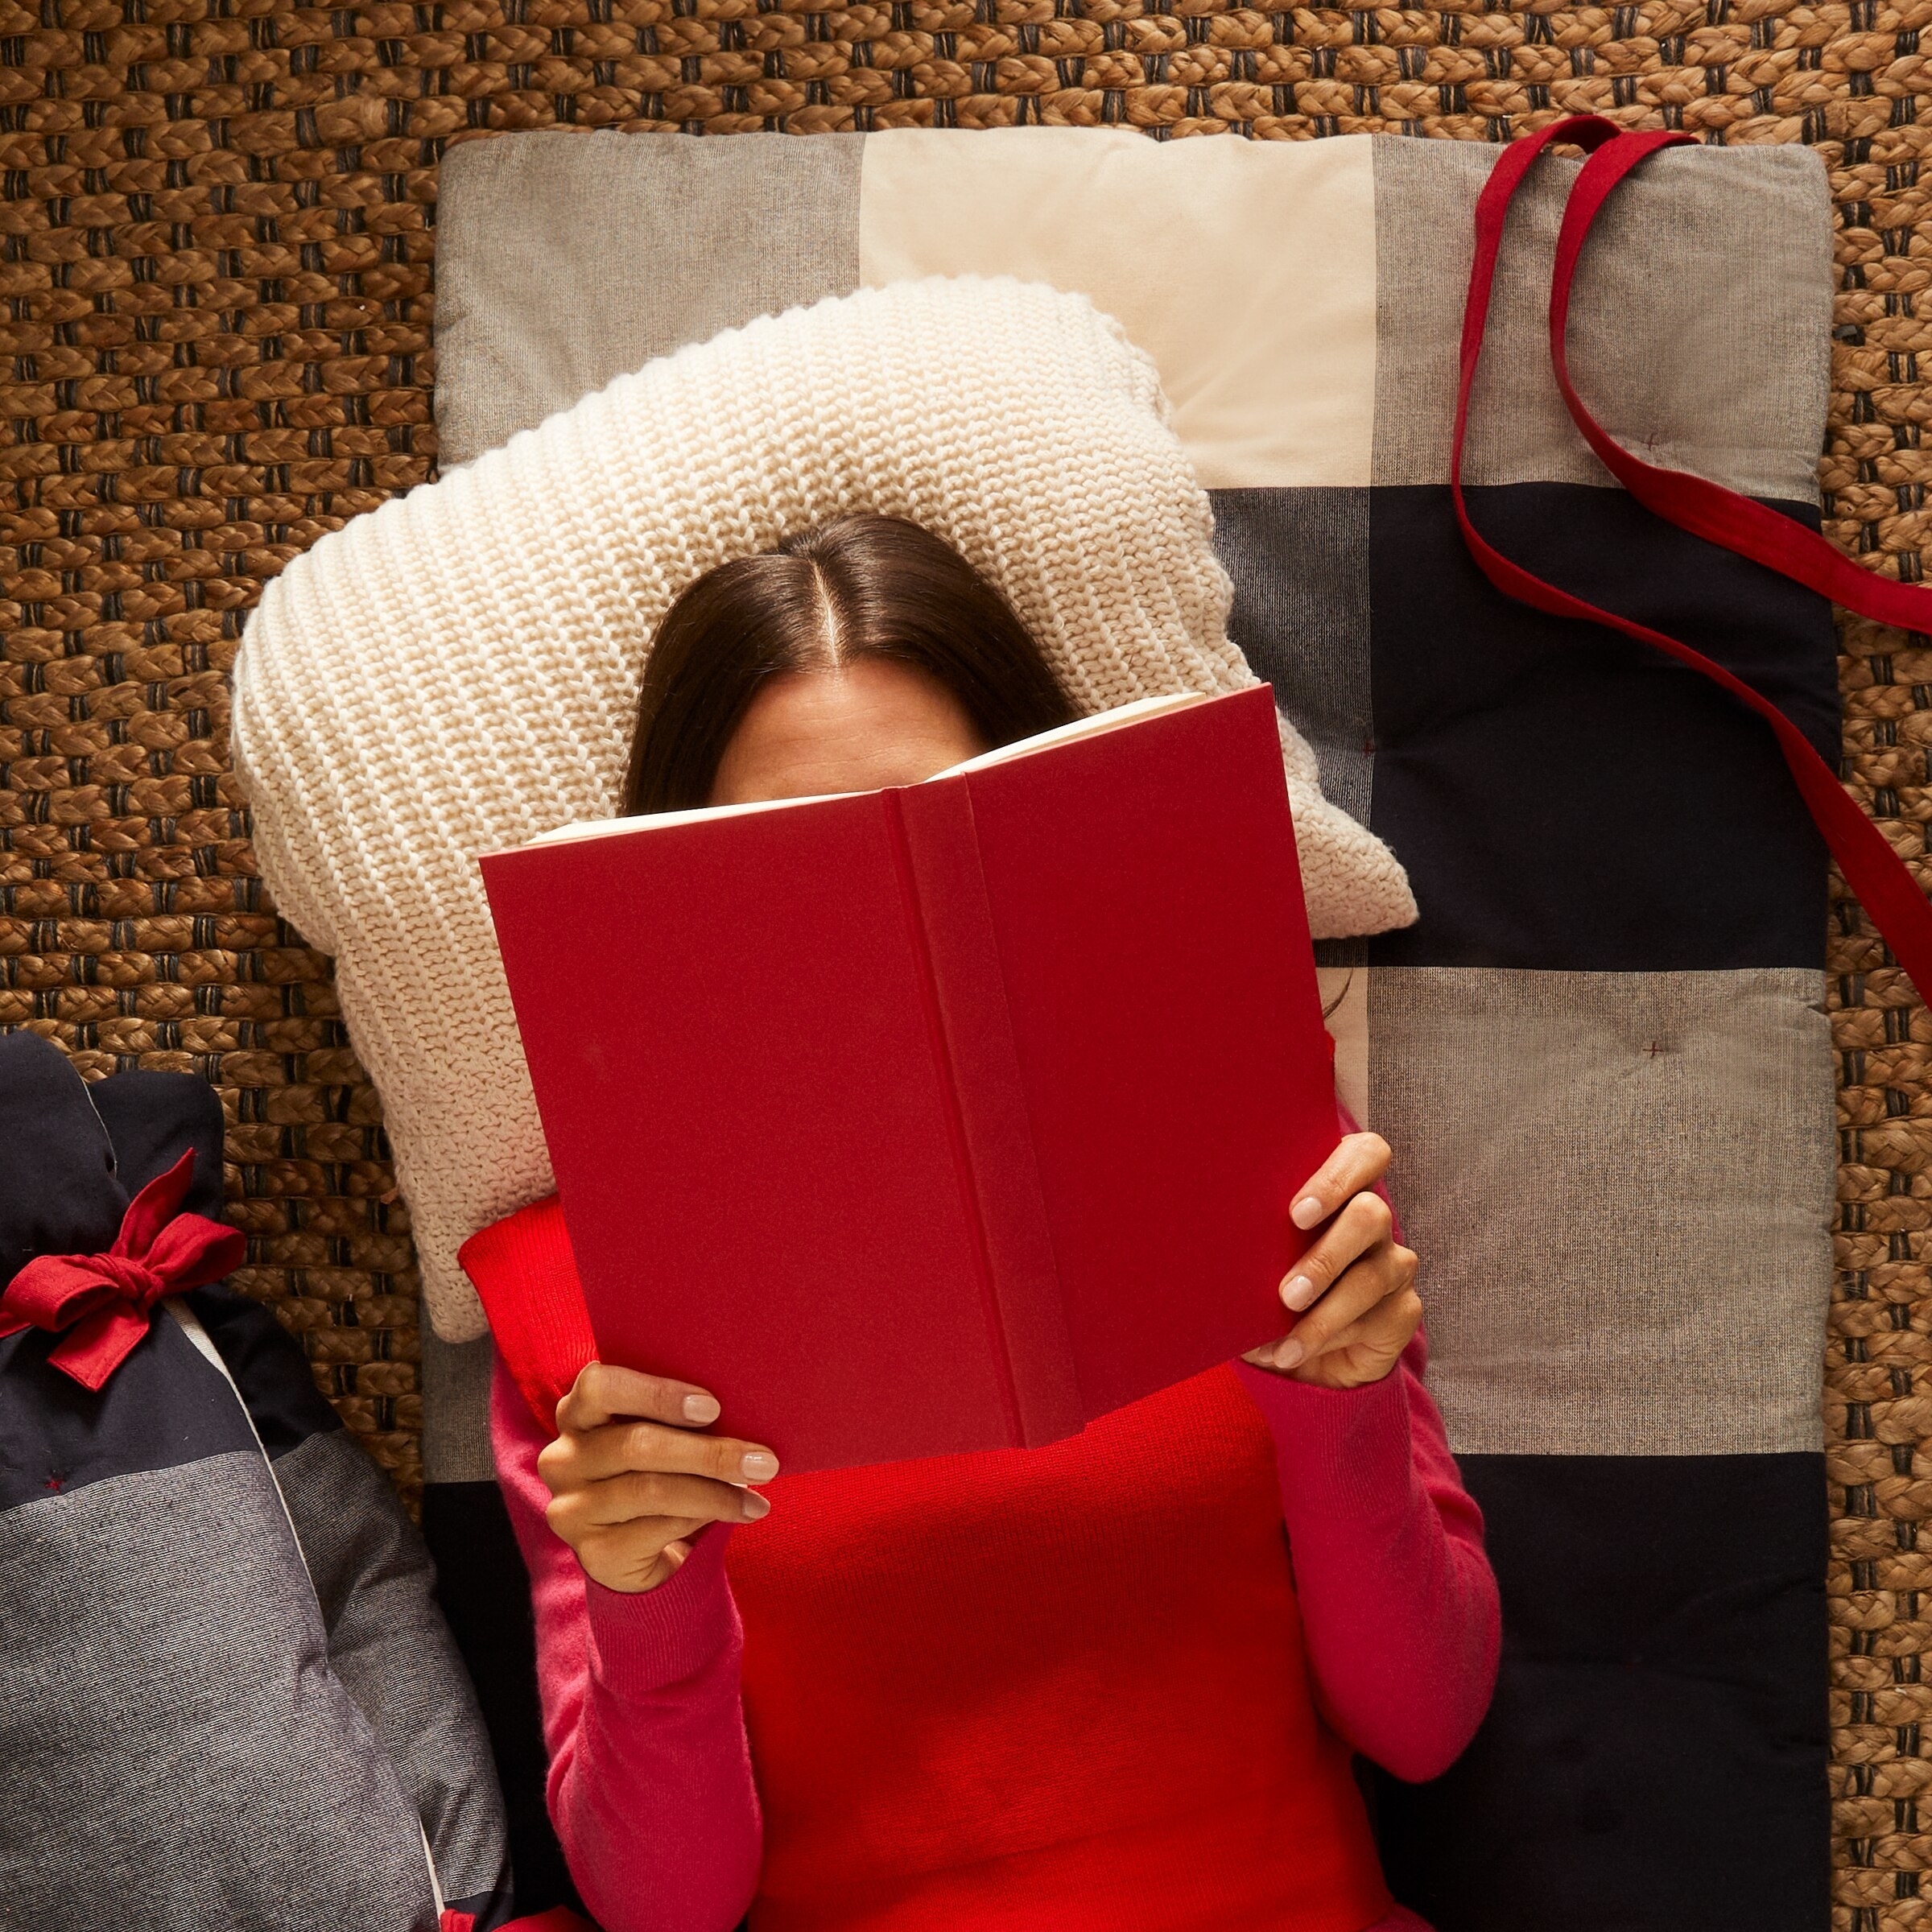 a person reading a book on the plaid mat